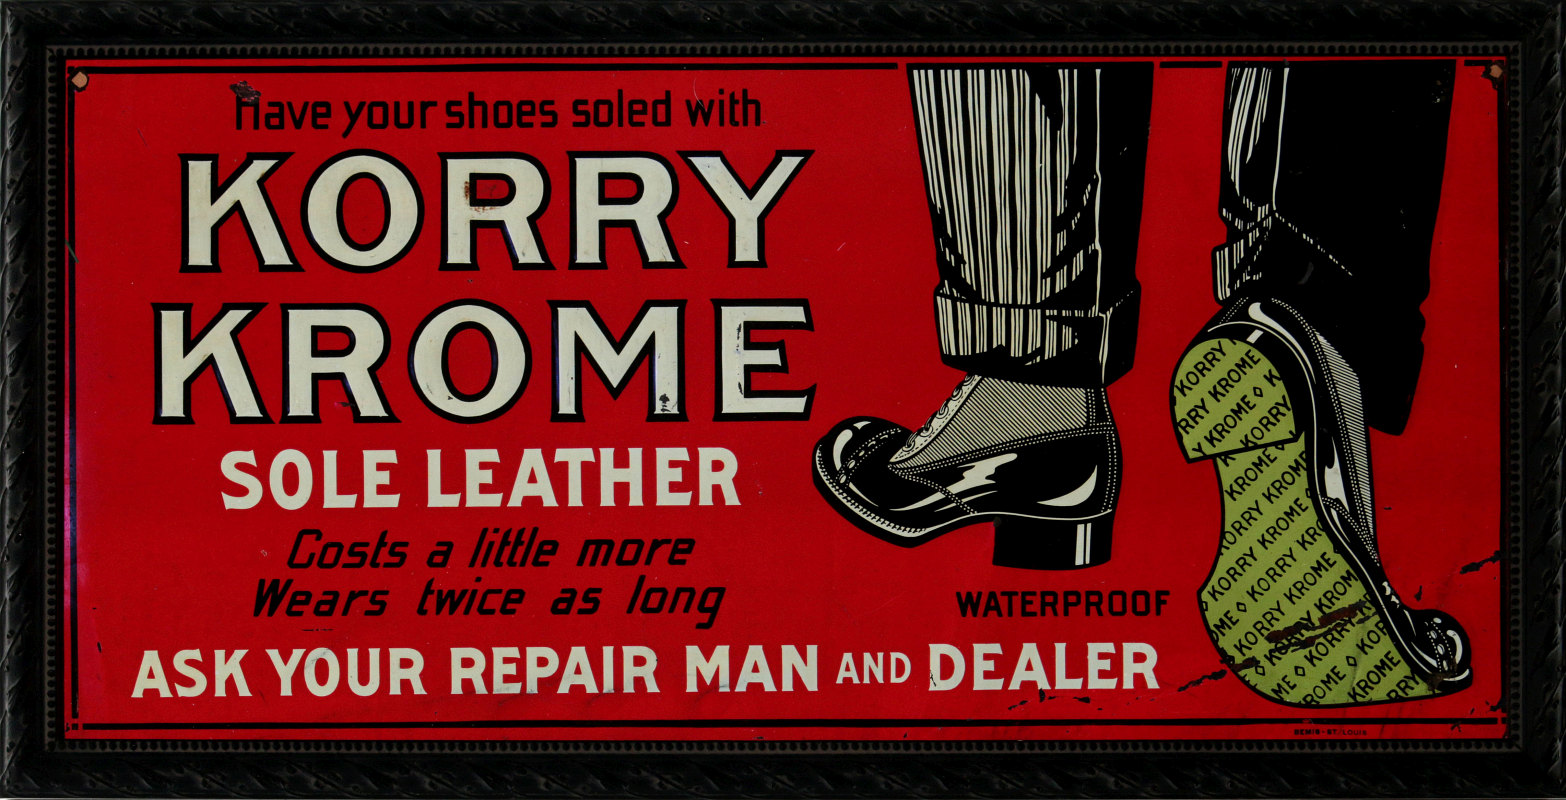 A CIRCA 1930 KORRY KROME SOLE LEATHER TIN SIGN